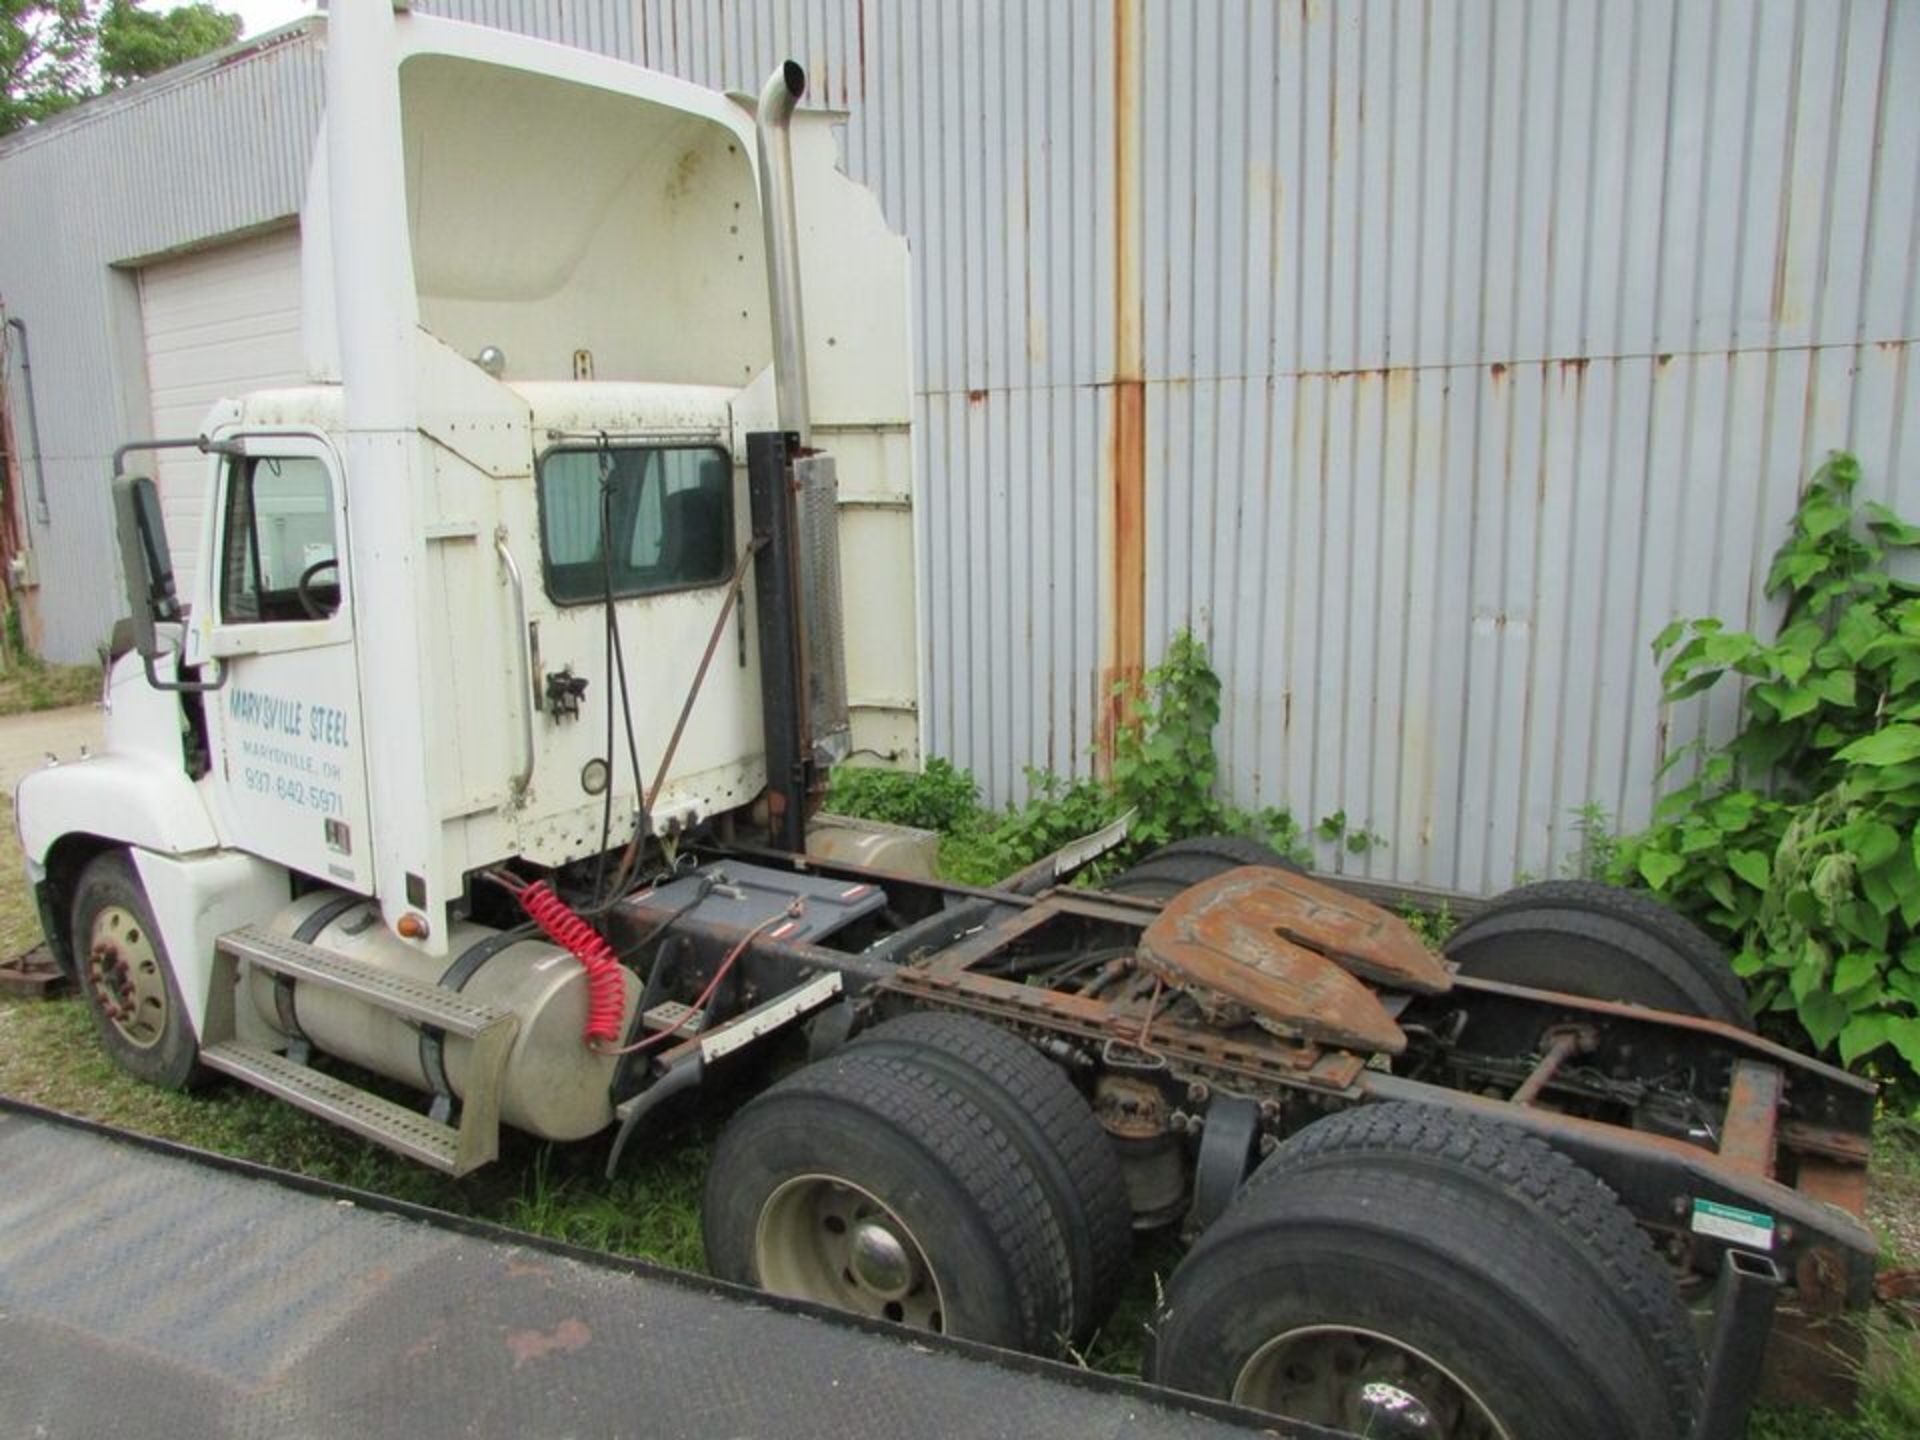 2002 Freightliner Century Class Day Cab Truck Tractor, 52,000 GVWR, Eaton Fuller 10-Speed Manual - Image 6 of 20